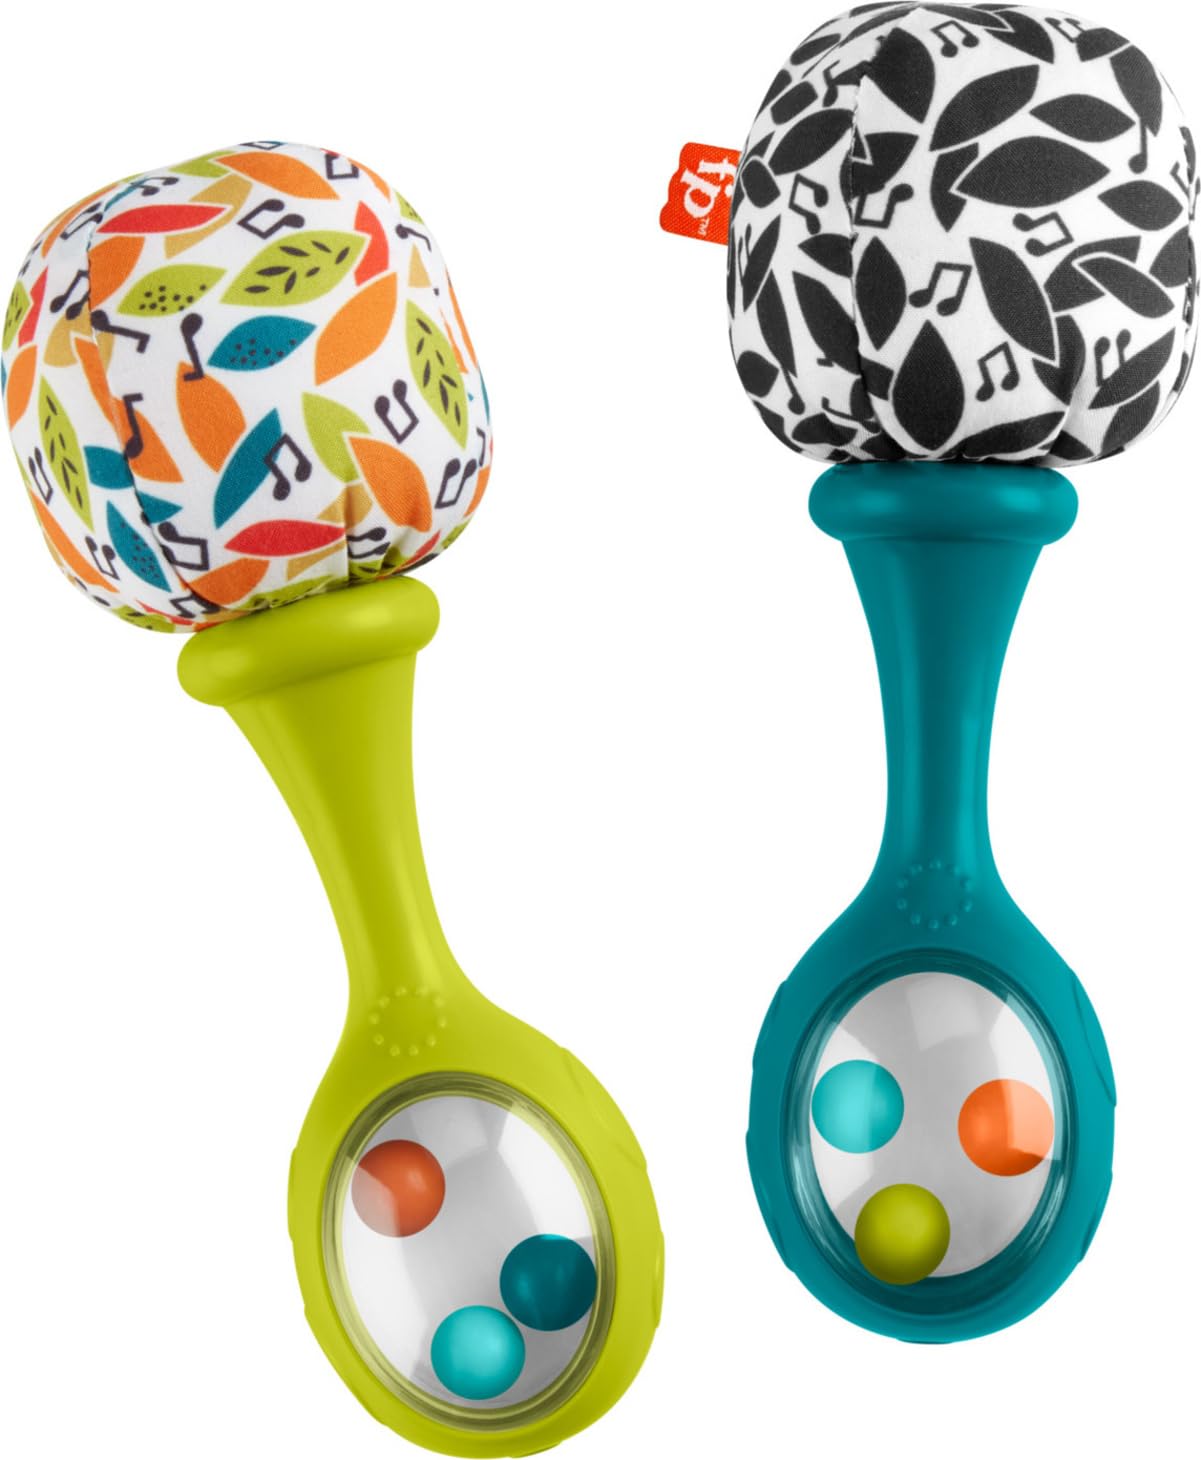 Fisher-Price Baby Newborn Toys Rattle ‘n Rock Maracas Set of 2 Soft Musical Instruments for Babies 3+ Months, Neutral Colors